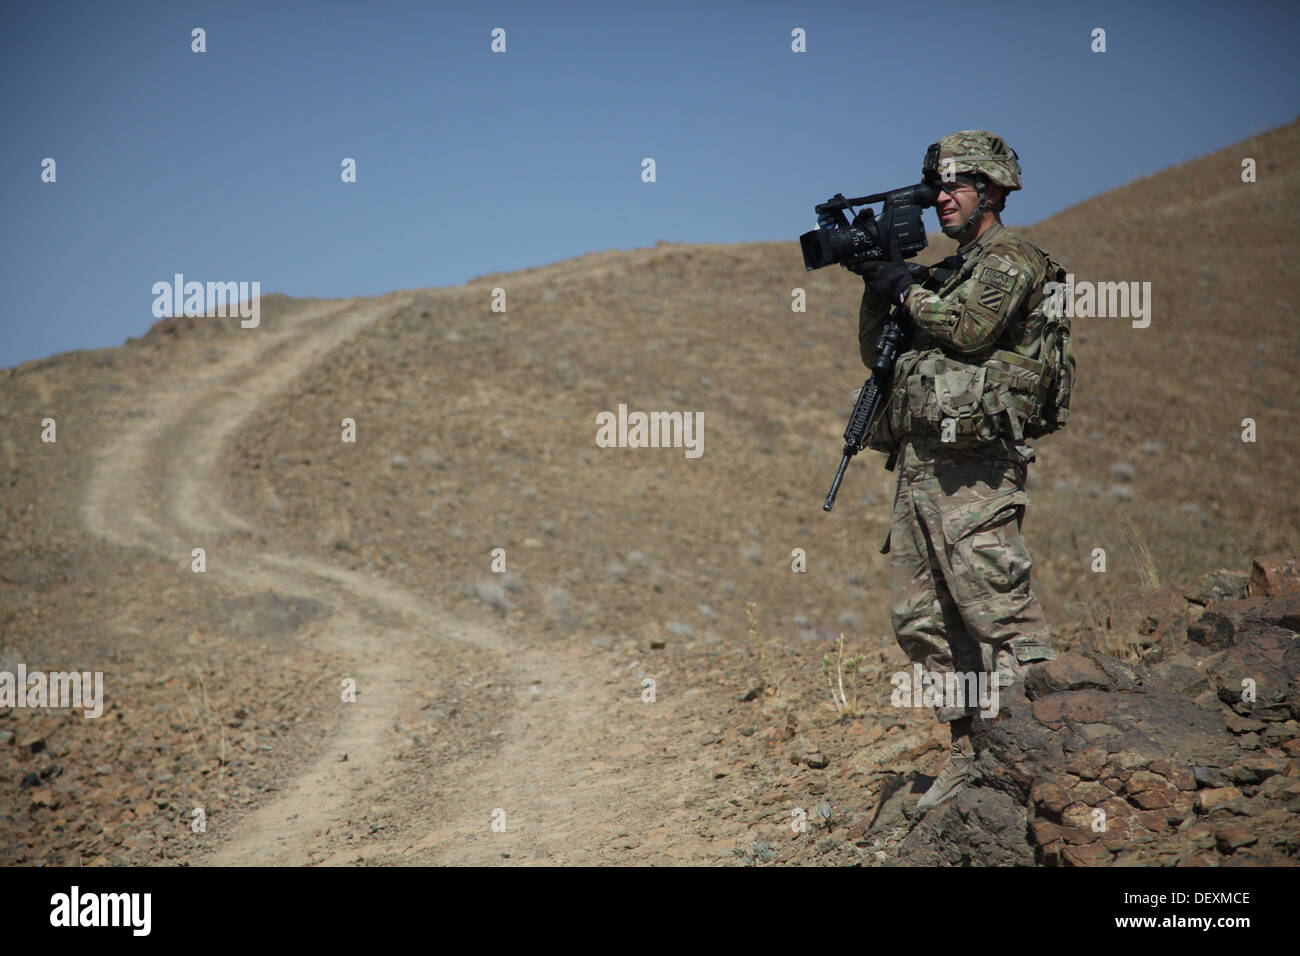 U.S. Army Sgt. Bob Yarborough, a broadcast journalist with the 4th Infantry Brigade Combat Team, 3rd Infantry Division, documents a live-fire exercise in Logar Province, Afghanistan, Sept. 18, 2013. Stock Photo